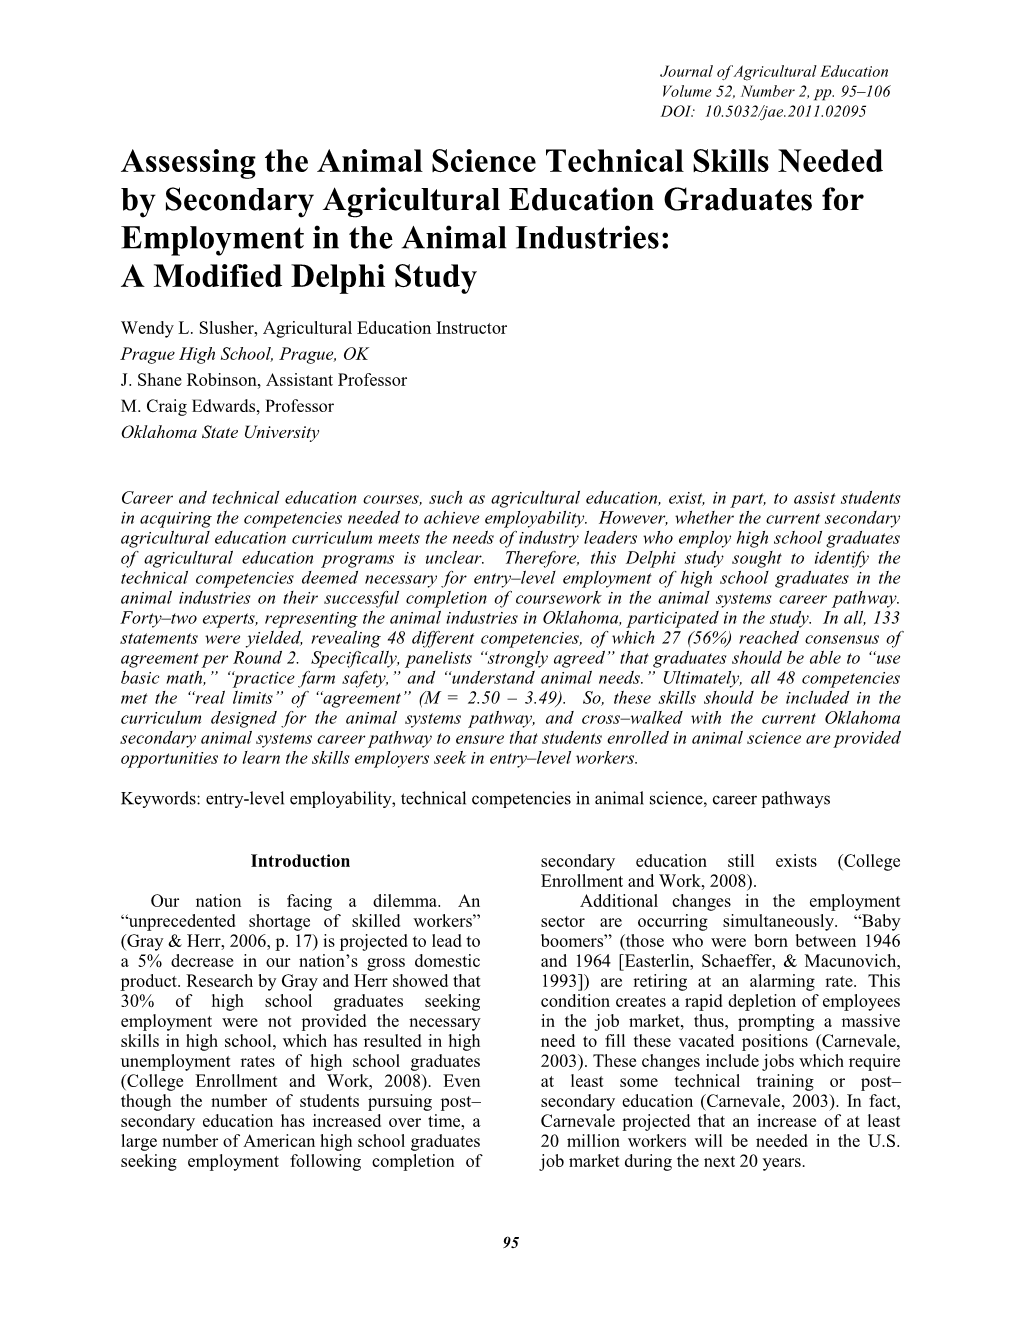 Assessing the Animal Science Technical Skills Needed by Secondary Agricultural Education Graduates for Employment in the Animal Industries: a Modified Delphi Study